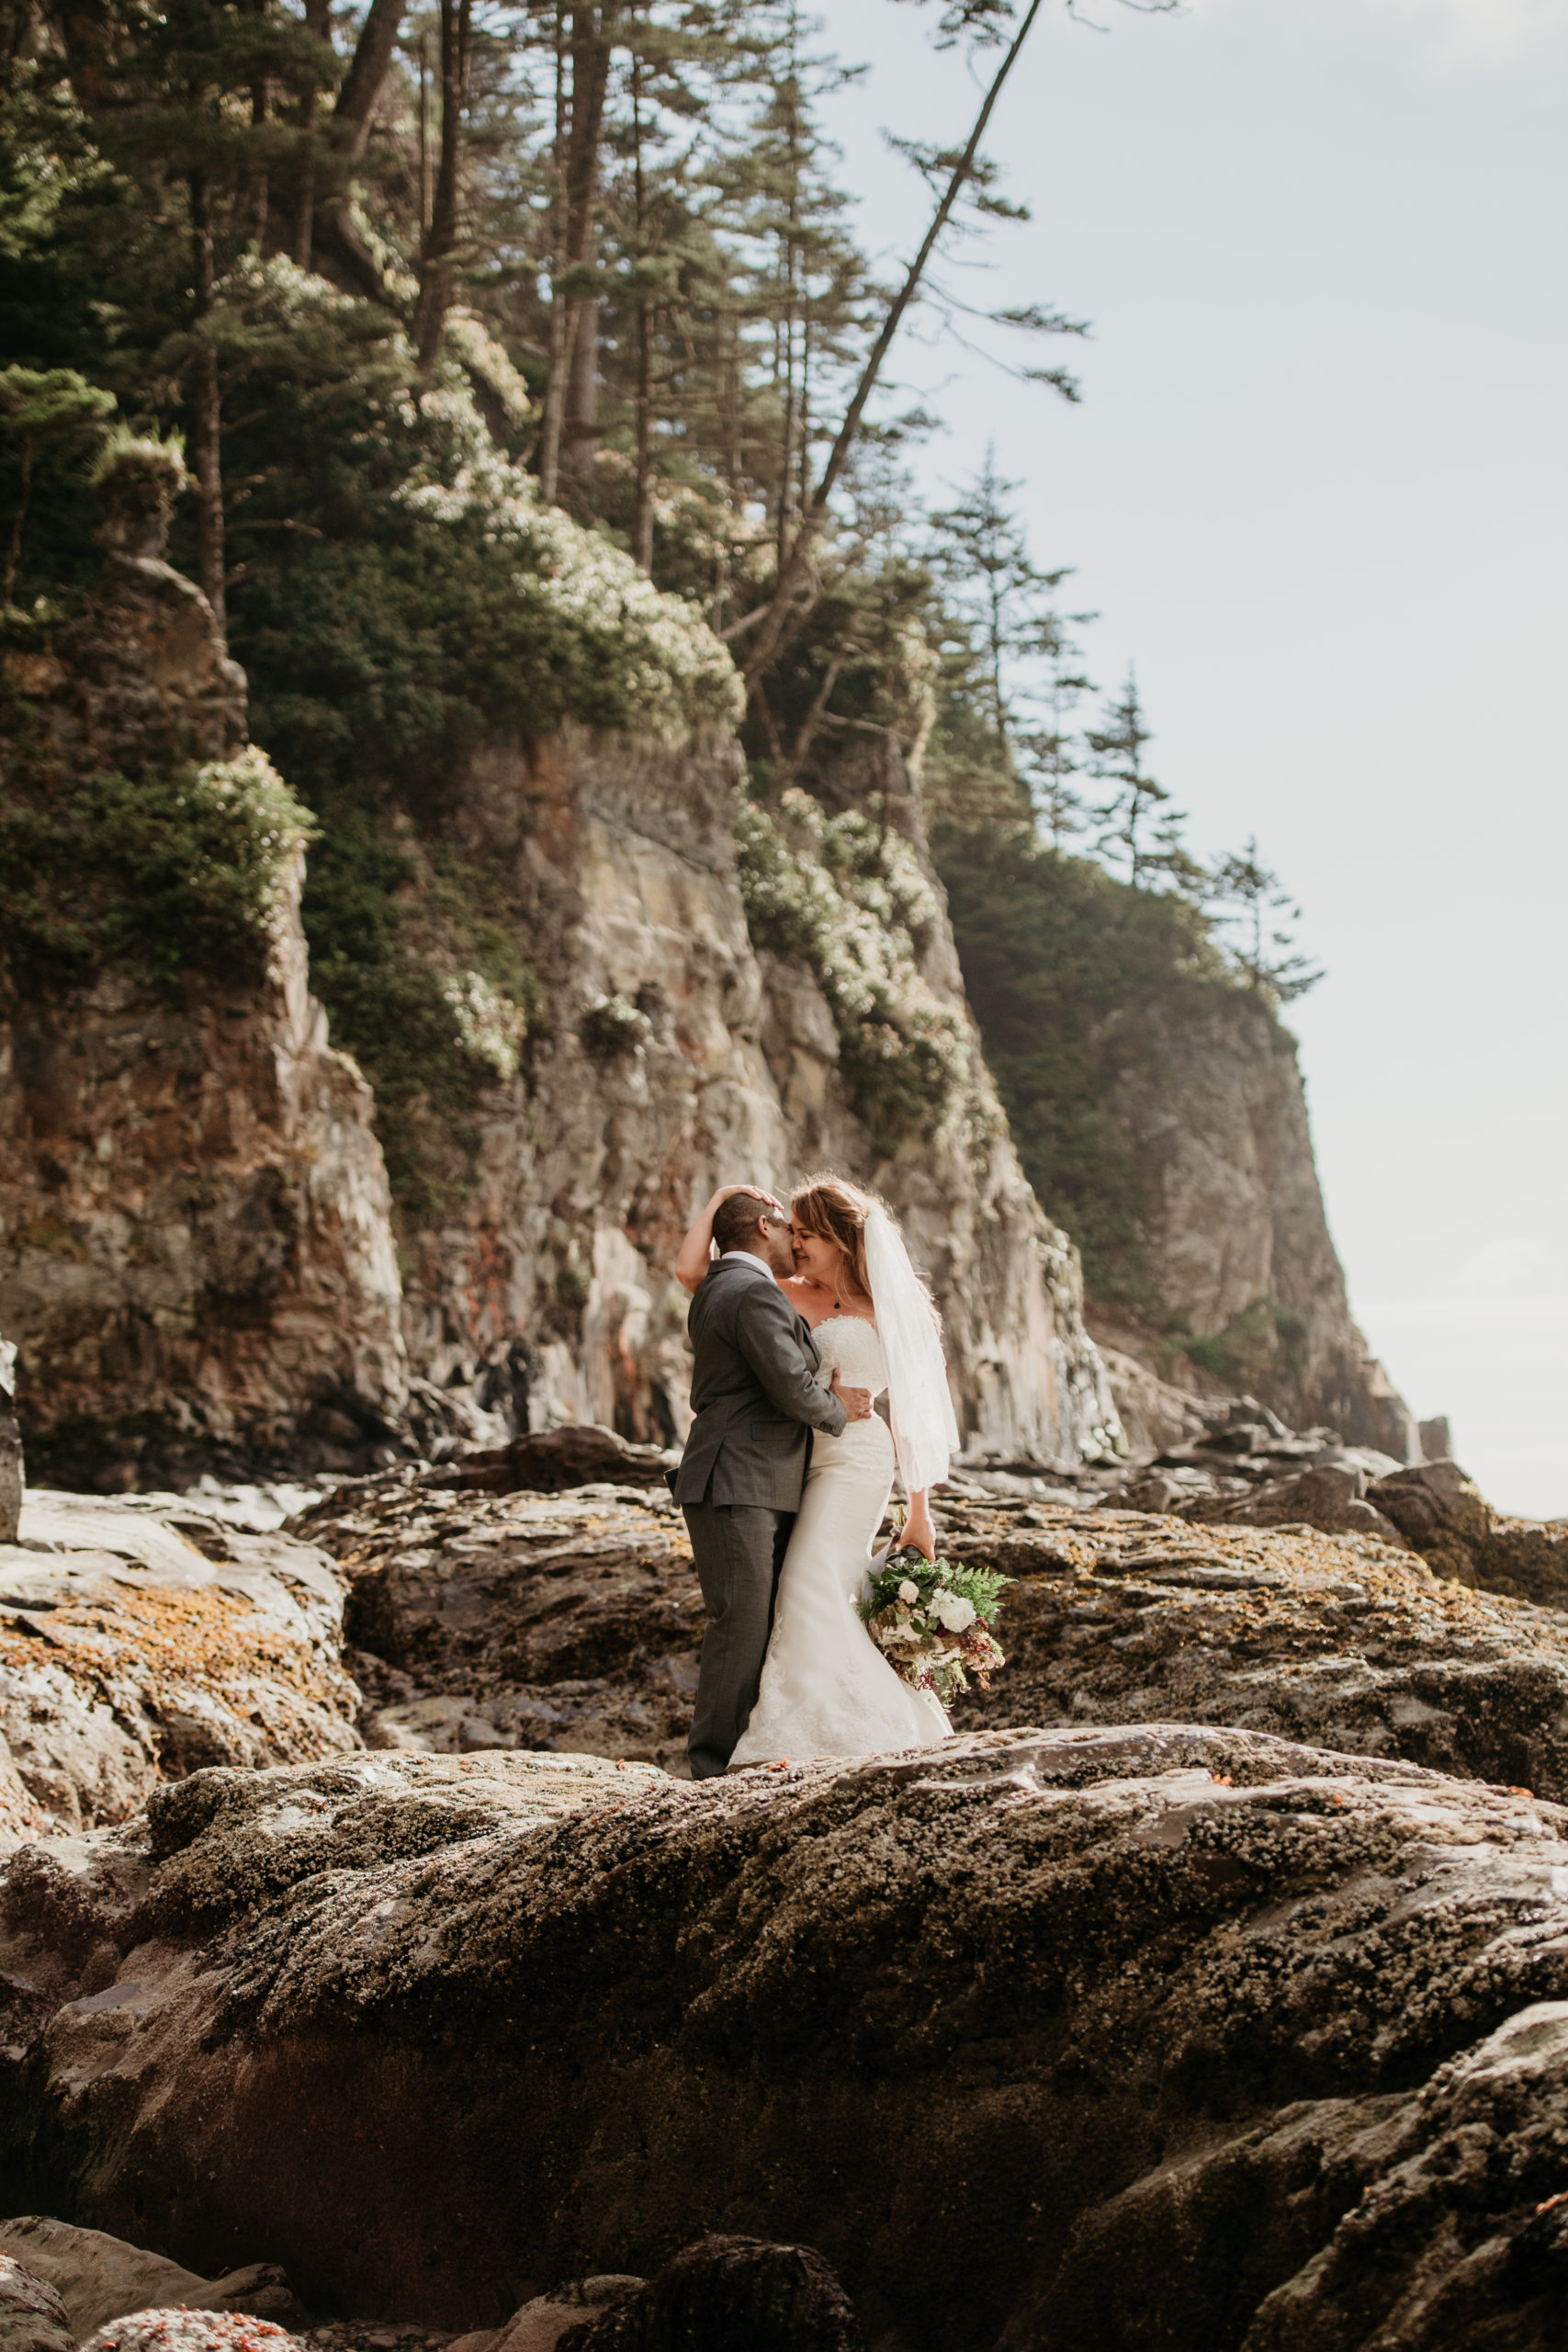 We love being an Oregon coast elopement photographer not only because of the gorgeous views, but the adventure that can happen in Oregon is one of our very favorite things! 

Are you ready for an Oregon coast elopement? We are shelling out all the info on the best of the Oregon coast. The three spots that capture our hearts in this blog are Hug Point, Arch Cape, and Cannon Beach. All of which are within a ten minute drive from each other! This stretch of magic is technically called "The North Coast" which stretches from the Columbia River to Cascade Head.
